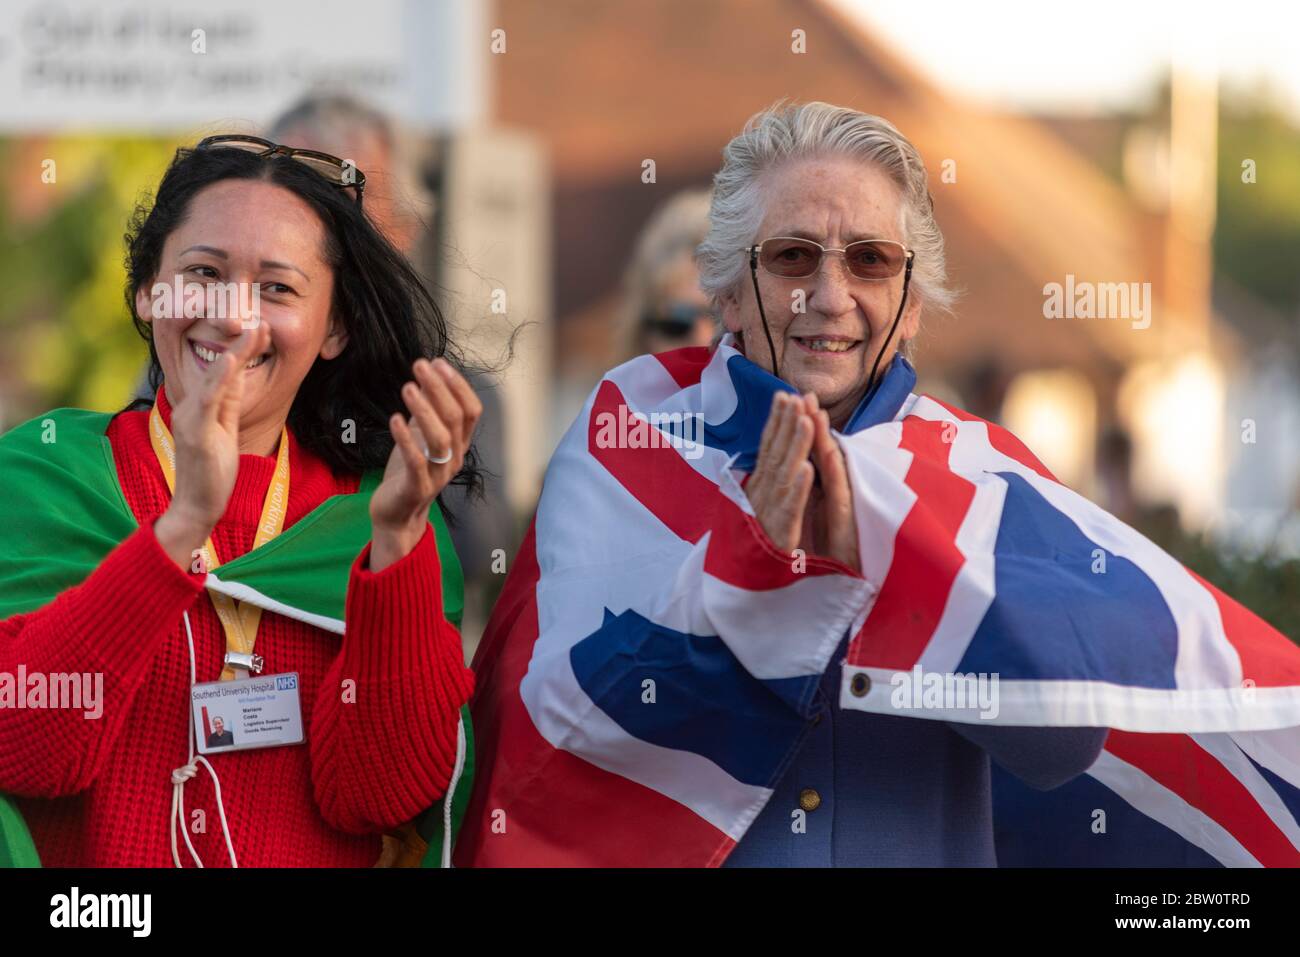 Final clap for carers at Southend University Hospital, Essex, UK at 8pm on Thursday evening. Members of the public in national flags clapping Stock Photo